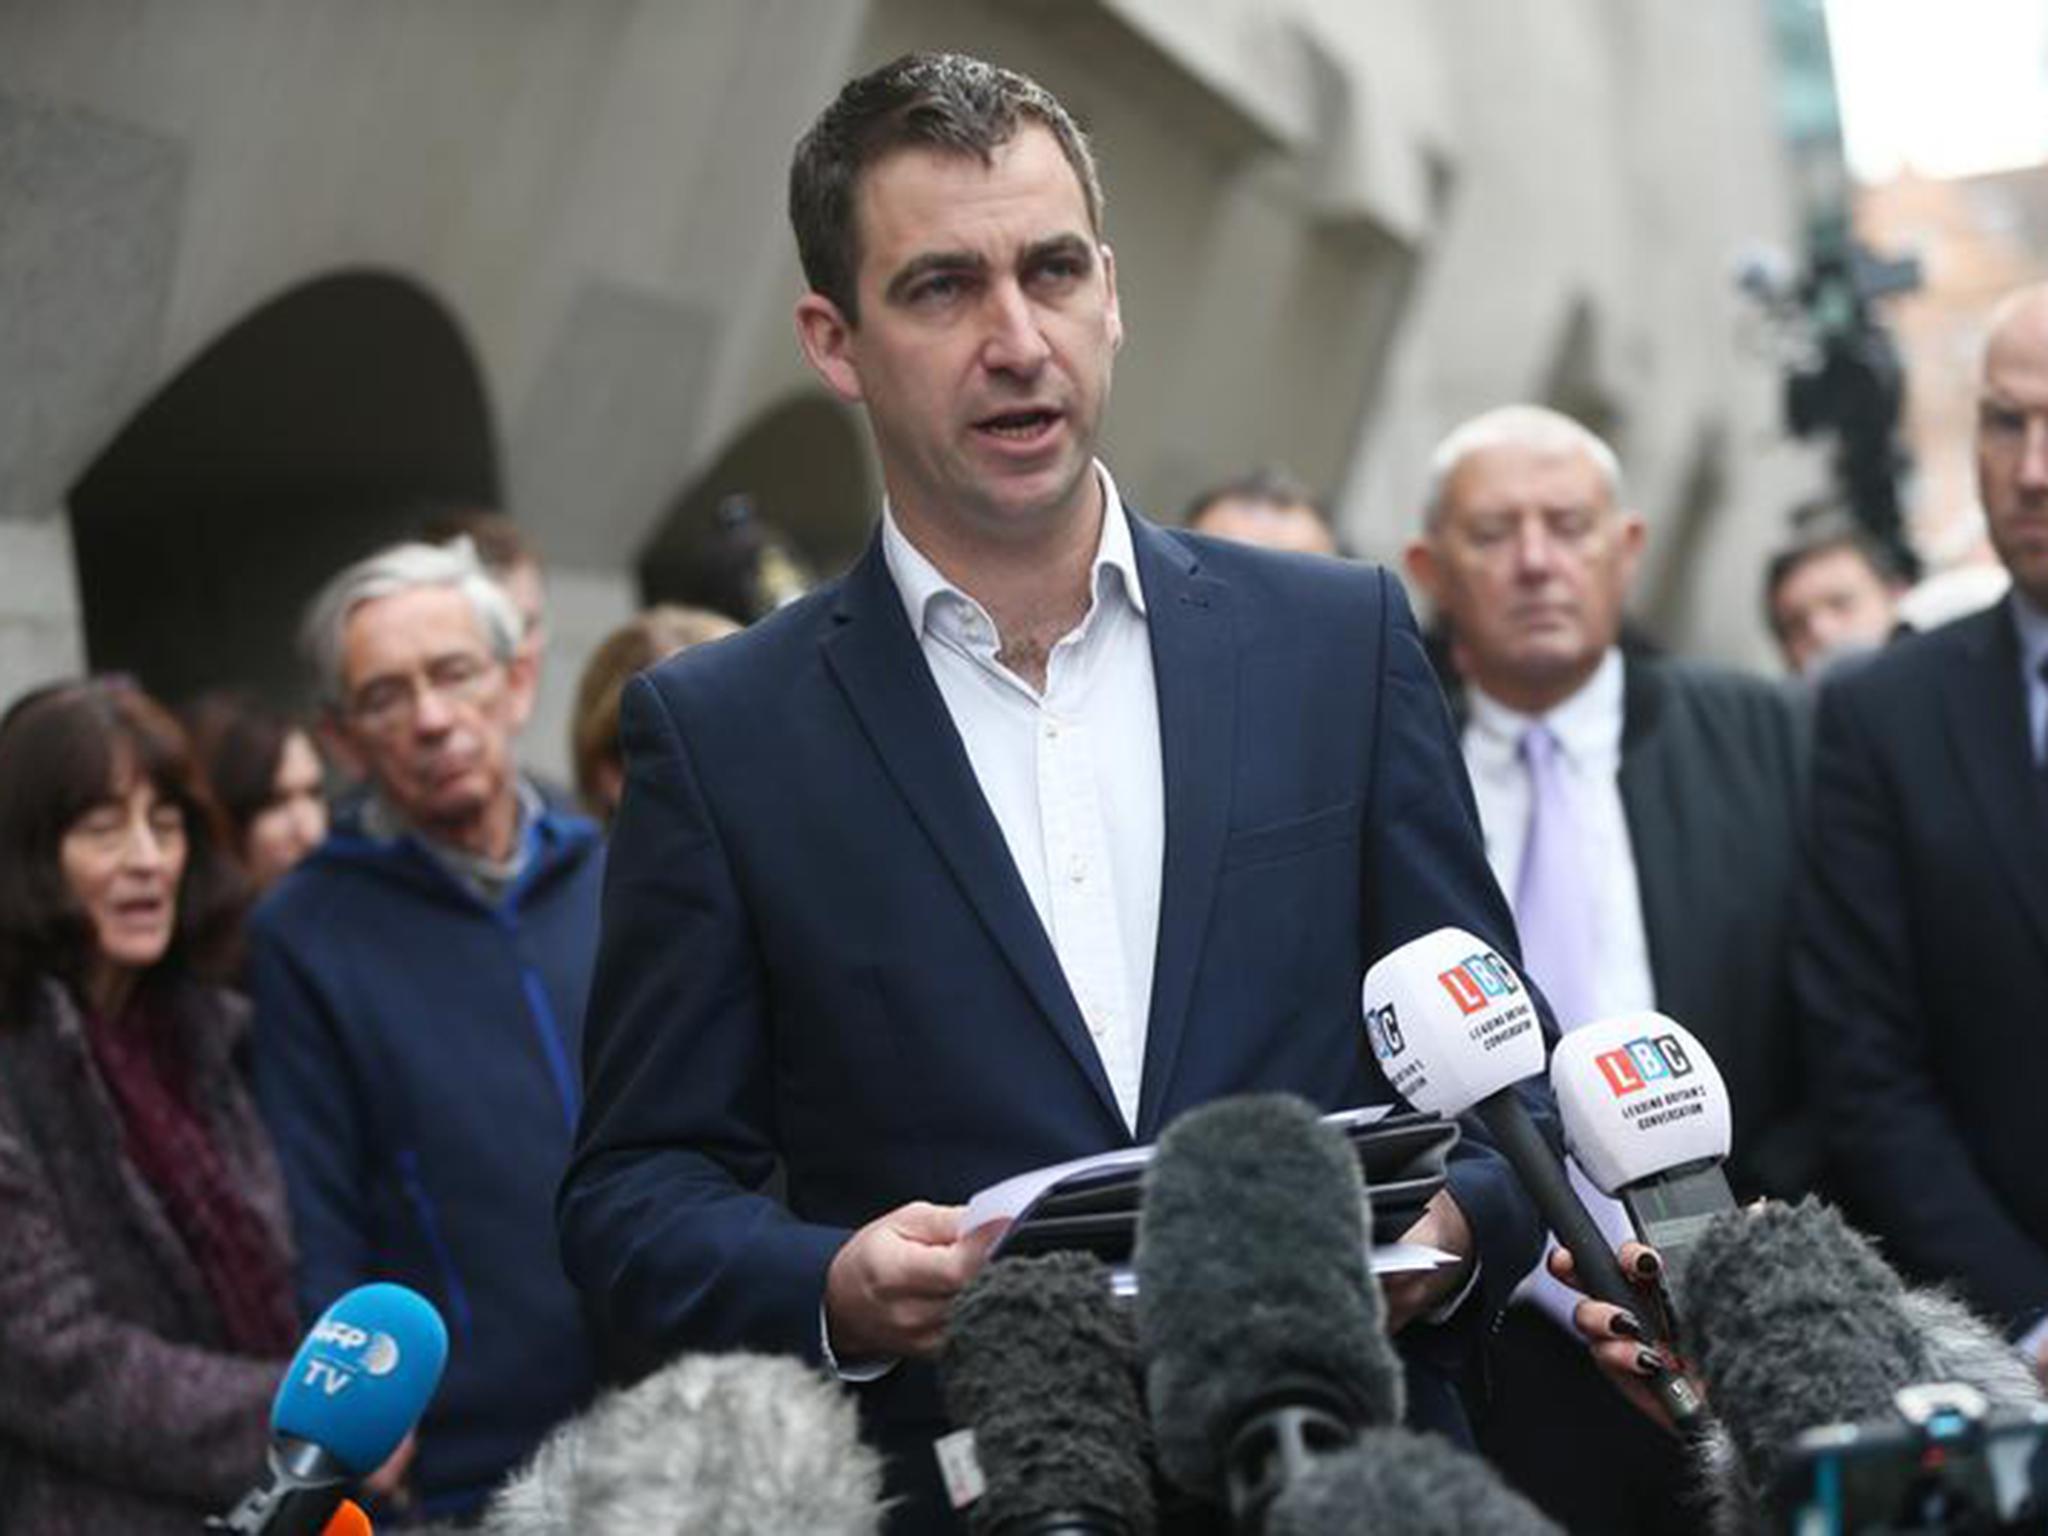 Brendan Cox, whose wife Jo Cox was murdered in 2016, is among the group's founders